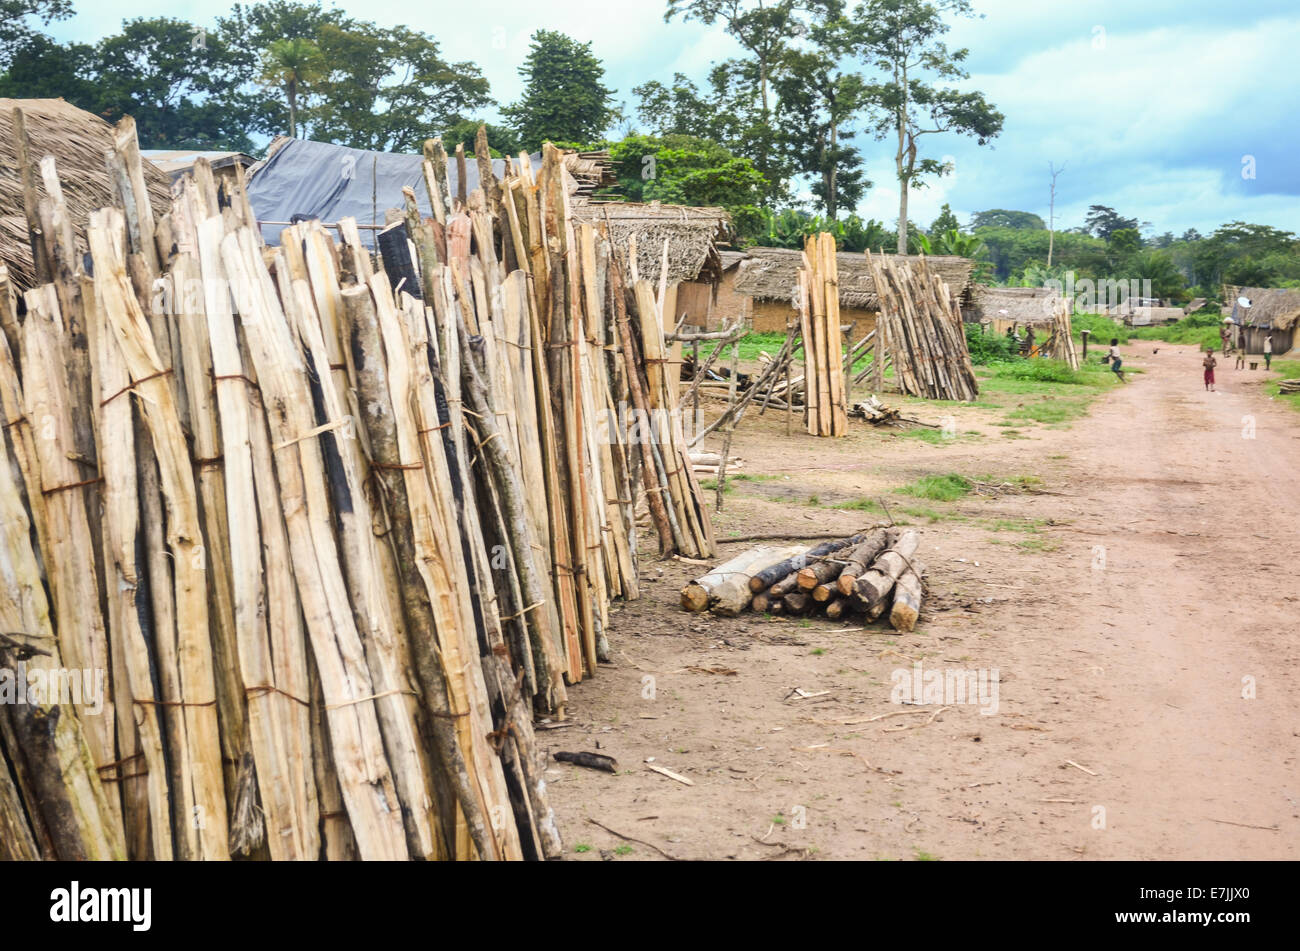 Wood for sale in a village of Ivory Coast (Côte d'Ivoire) at the border with Liberia Stock Photo